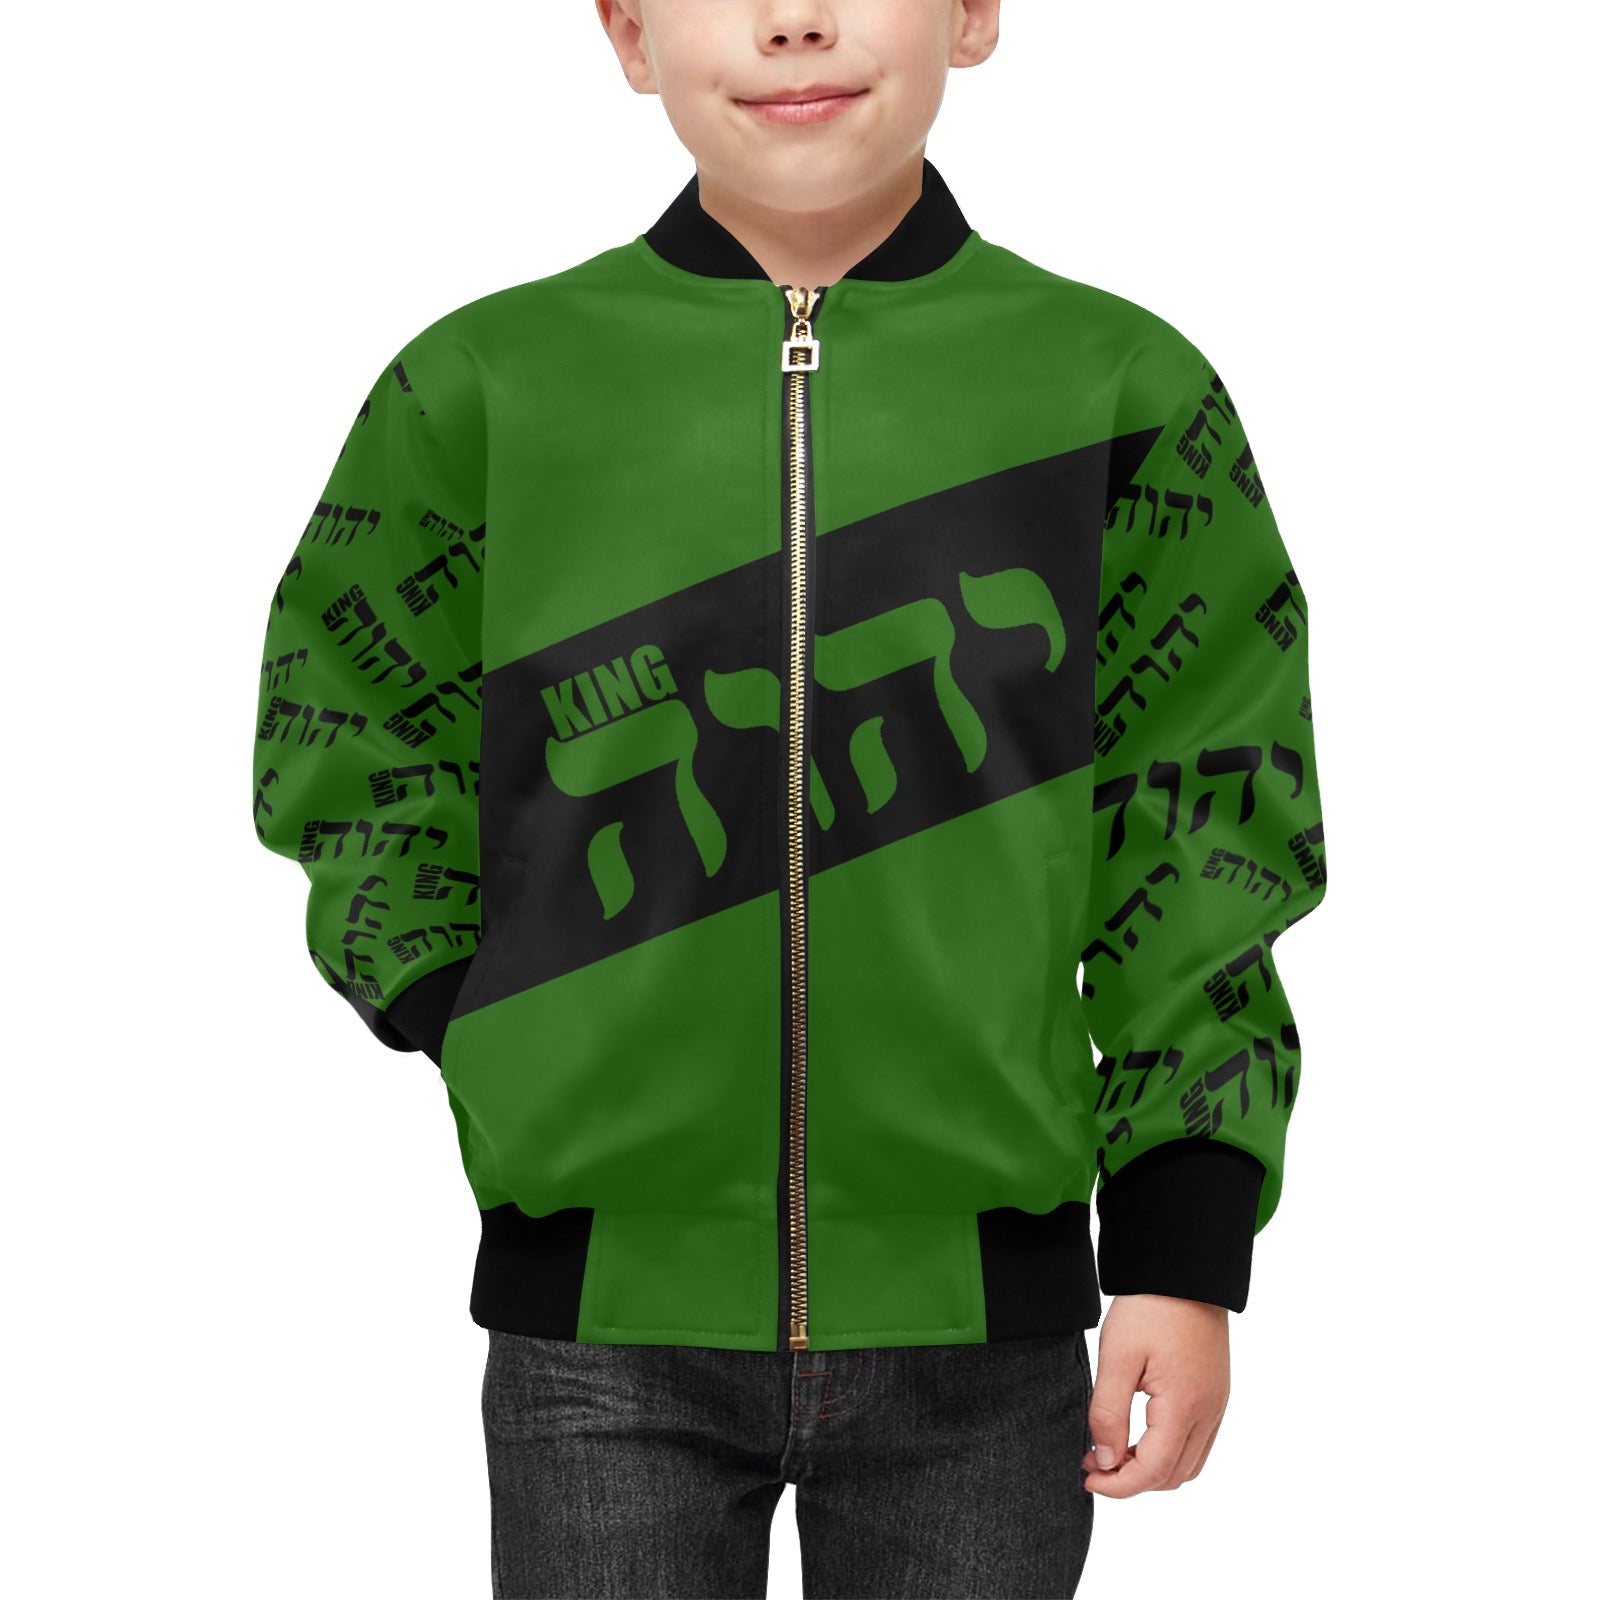 King YAHWEH Luxe III Kids' Bomber Jacket with Pockets (Onyx)